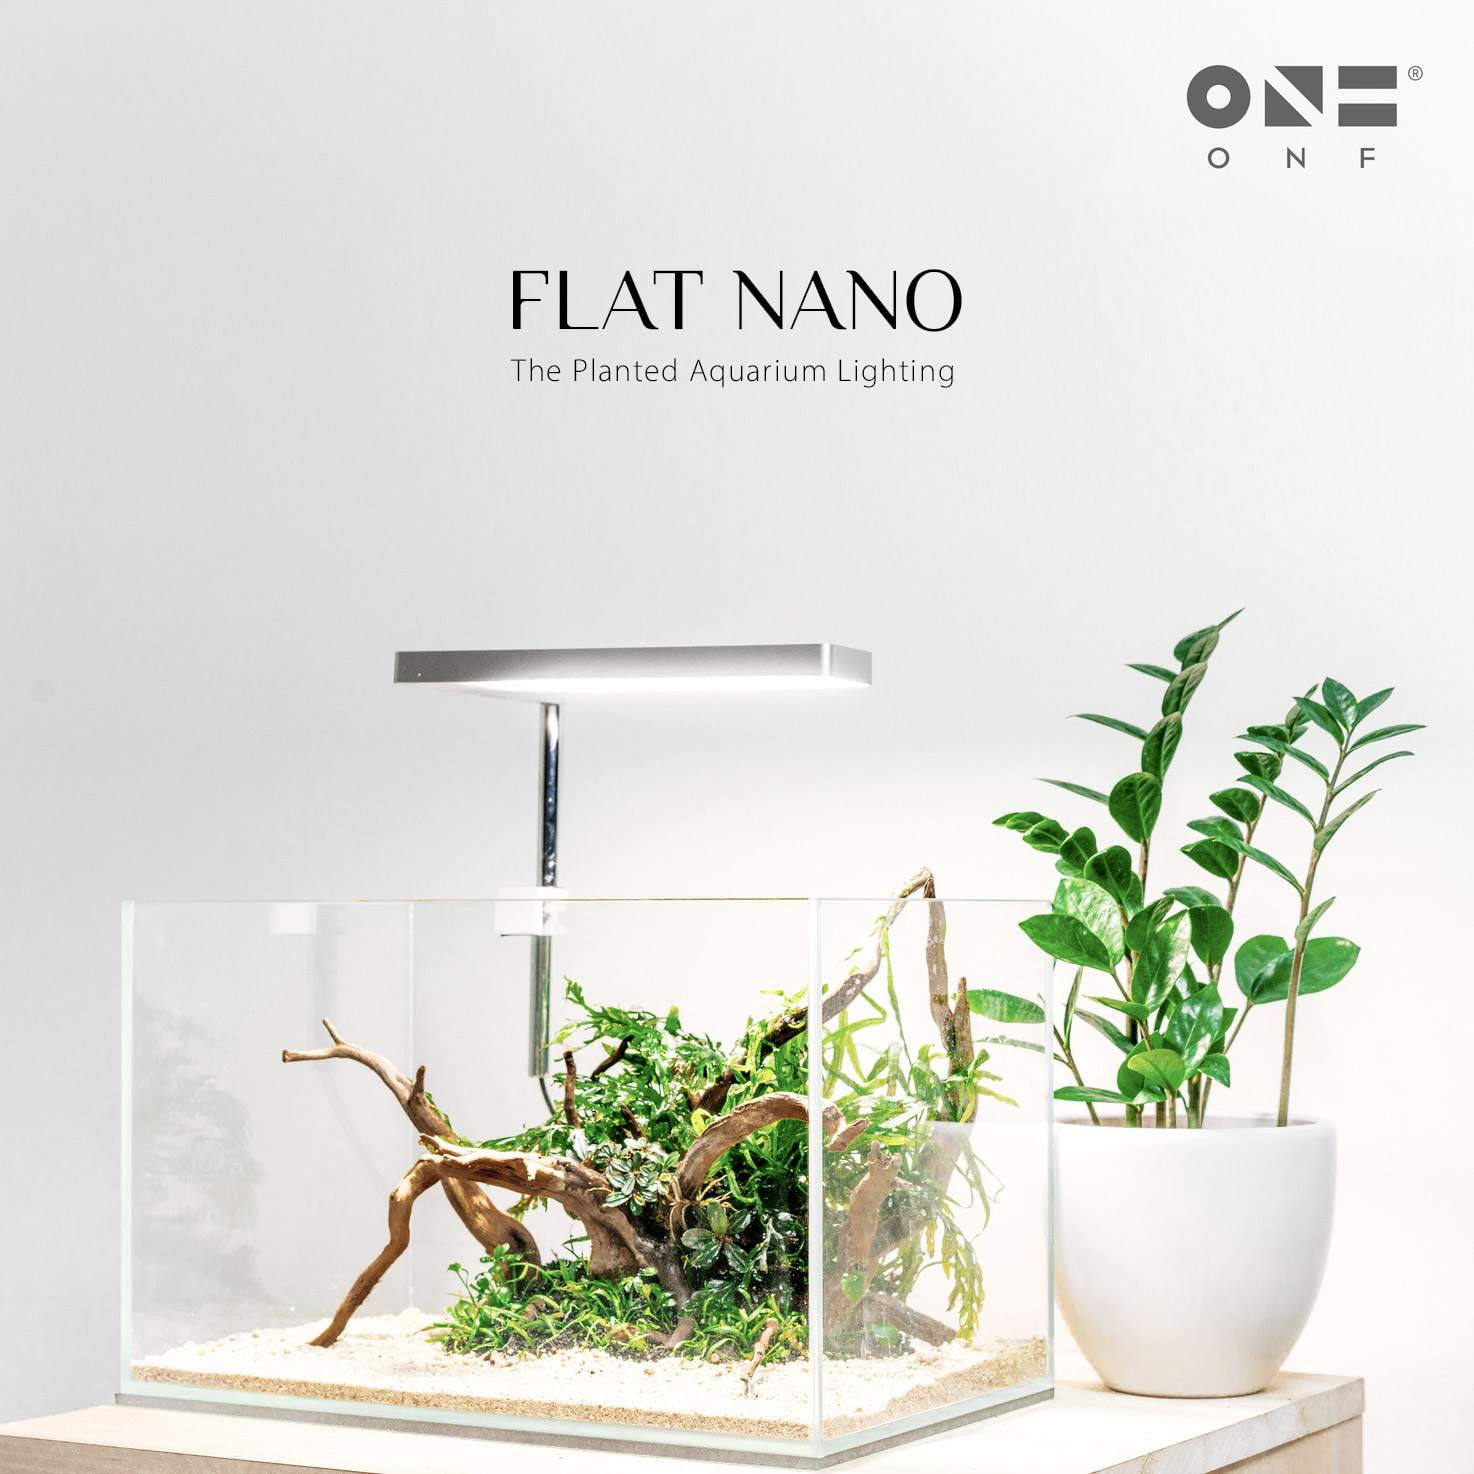 ONF Flat Nano - The Planted Aquarium Lighting, LED light with built-in  Dimmer